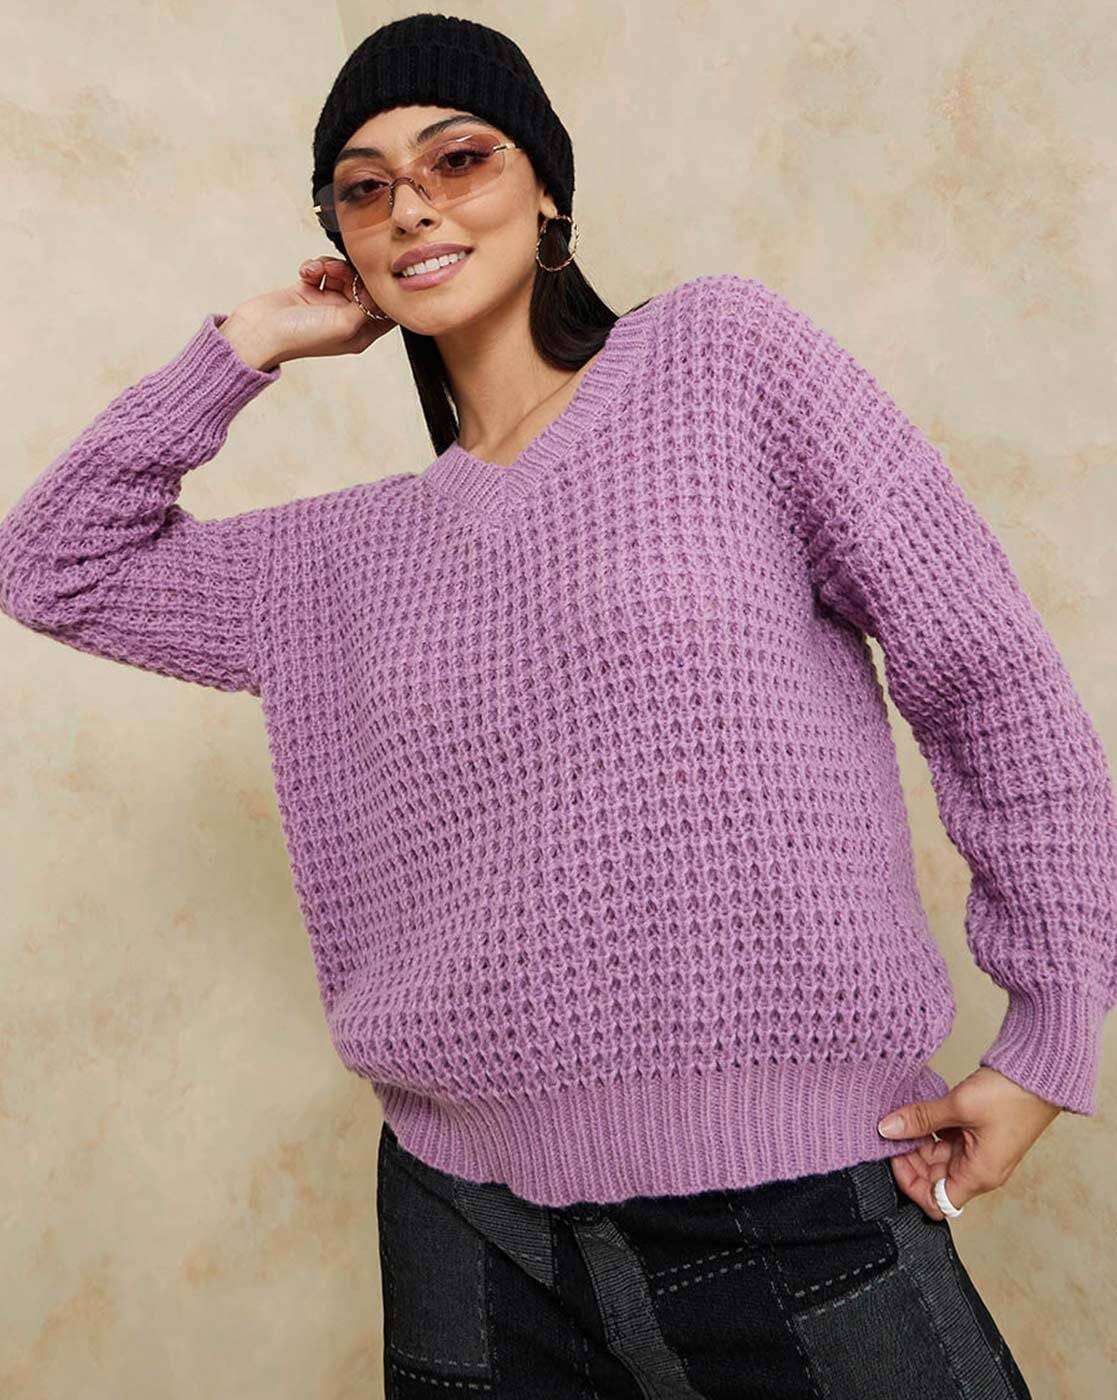 Layered Sweater and Polka Dot Blouse - Lady in VioletLady in Violet